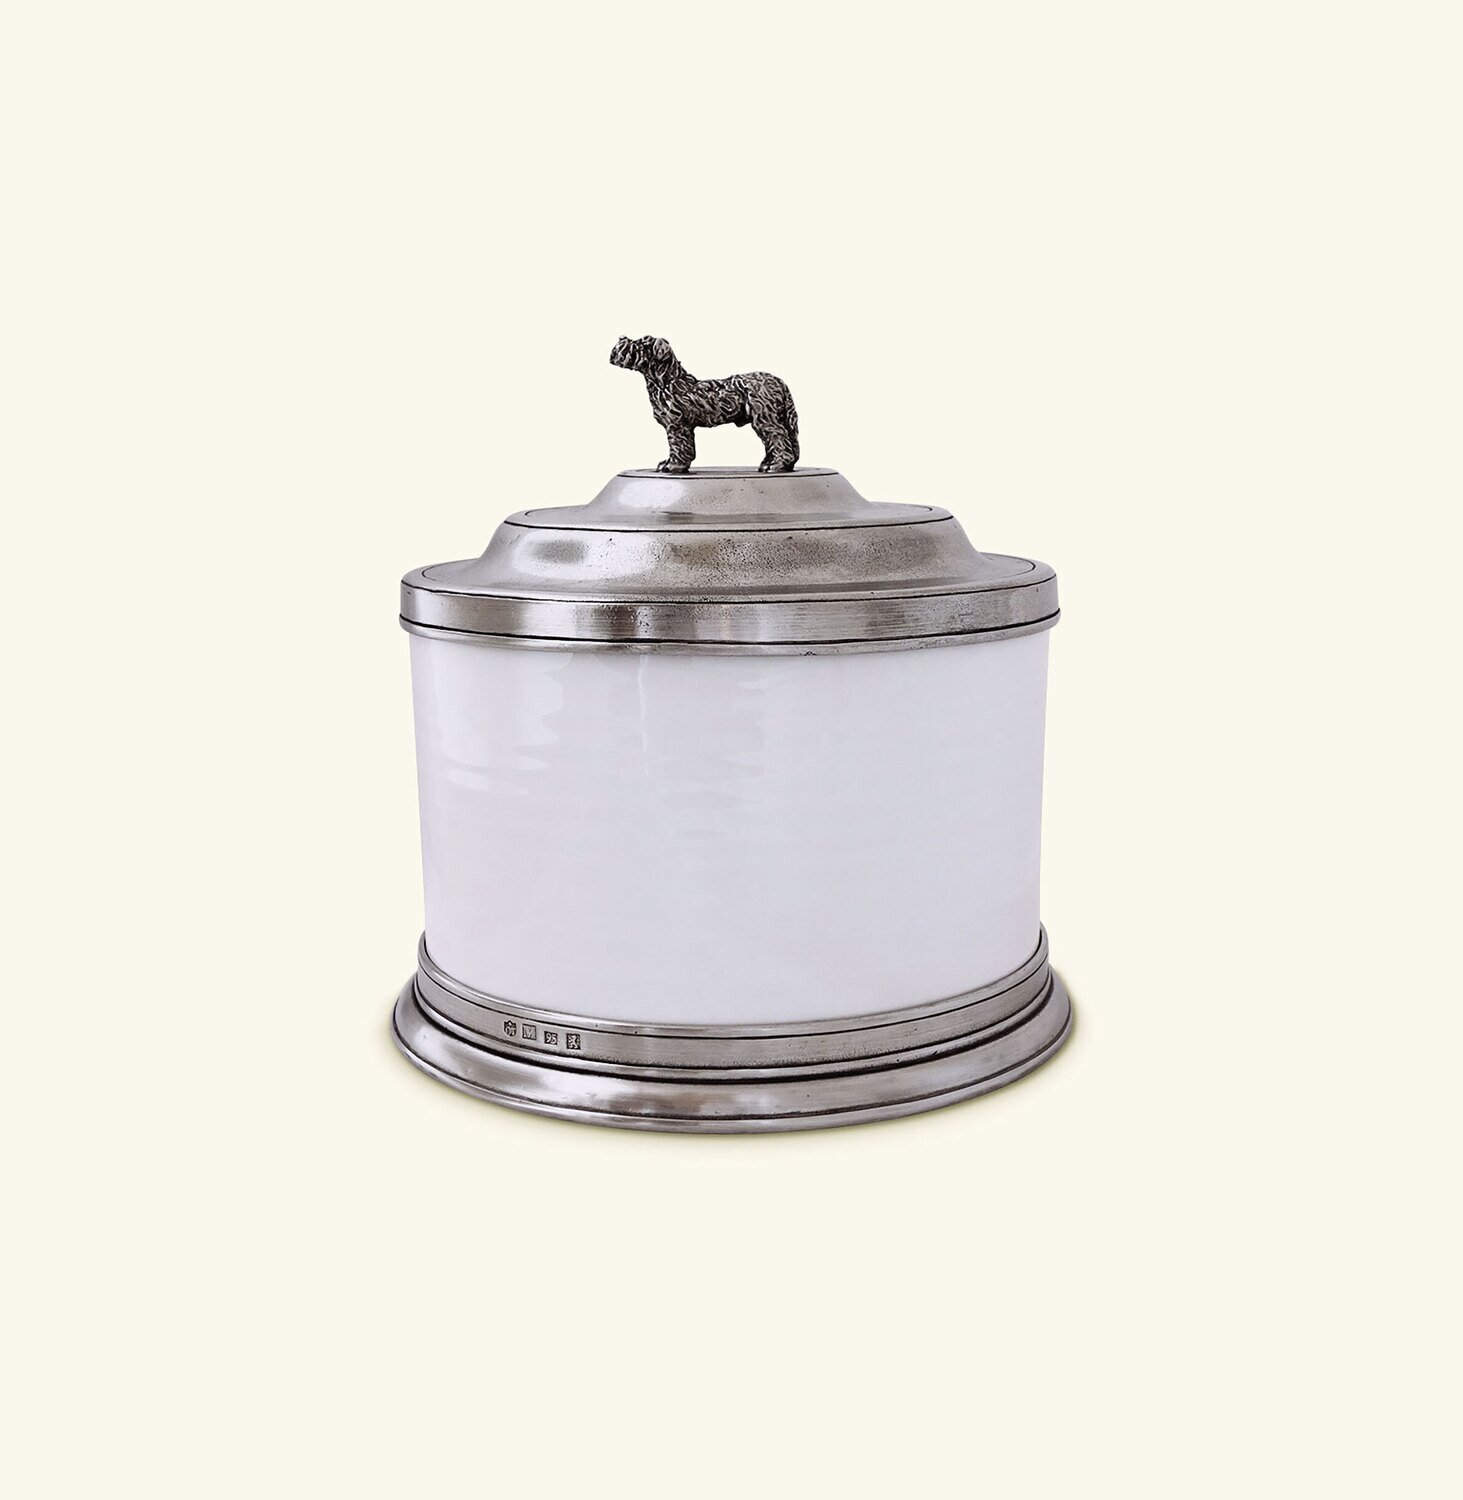 Match Pewter Convivio Cookie Jar with Dog Finial 1555